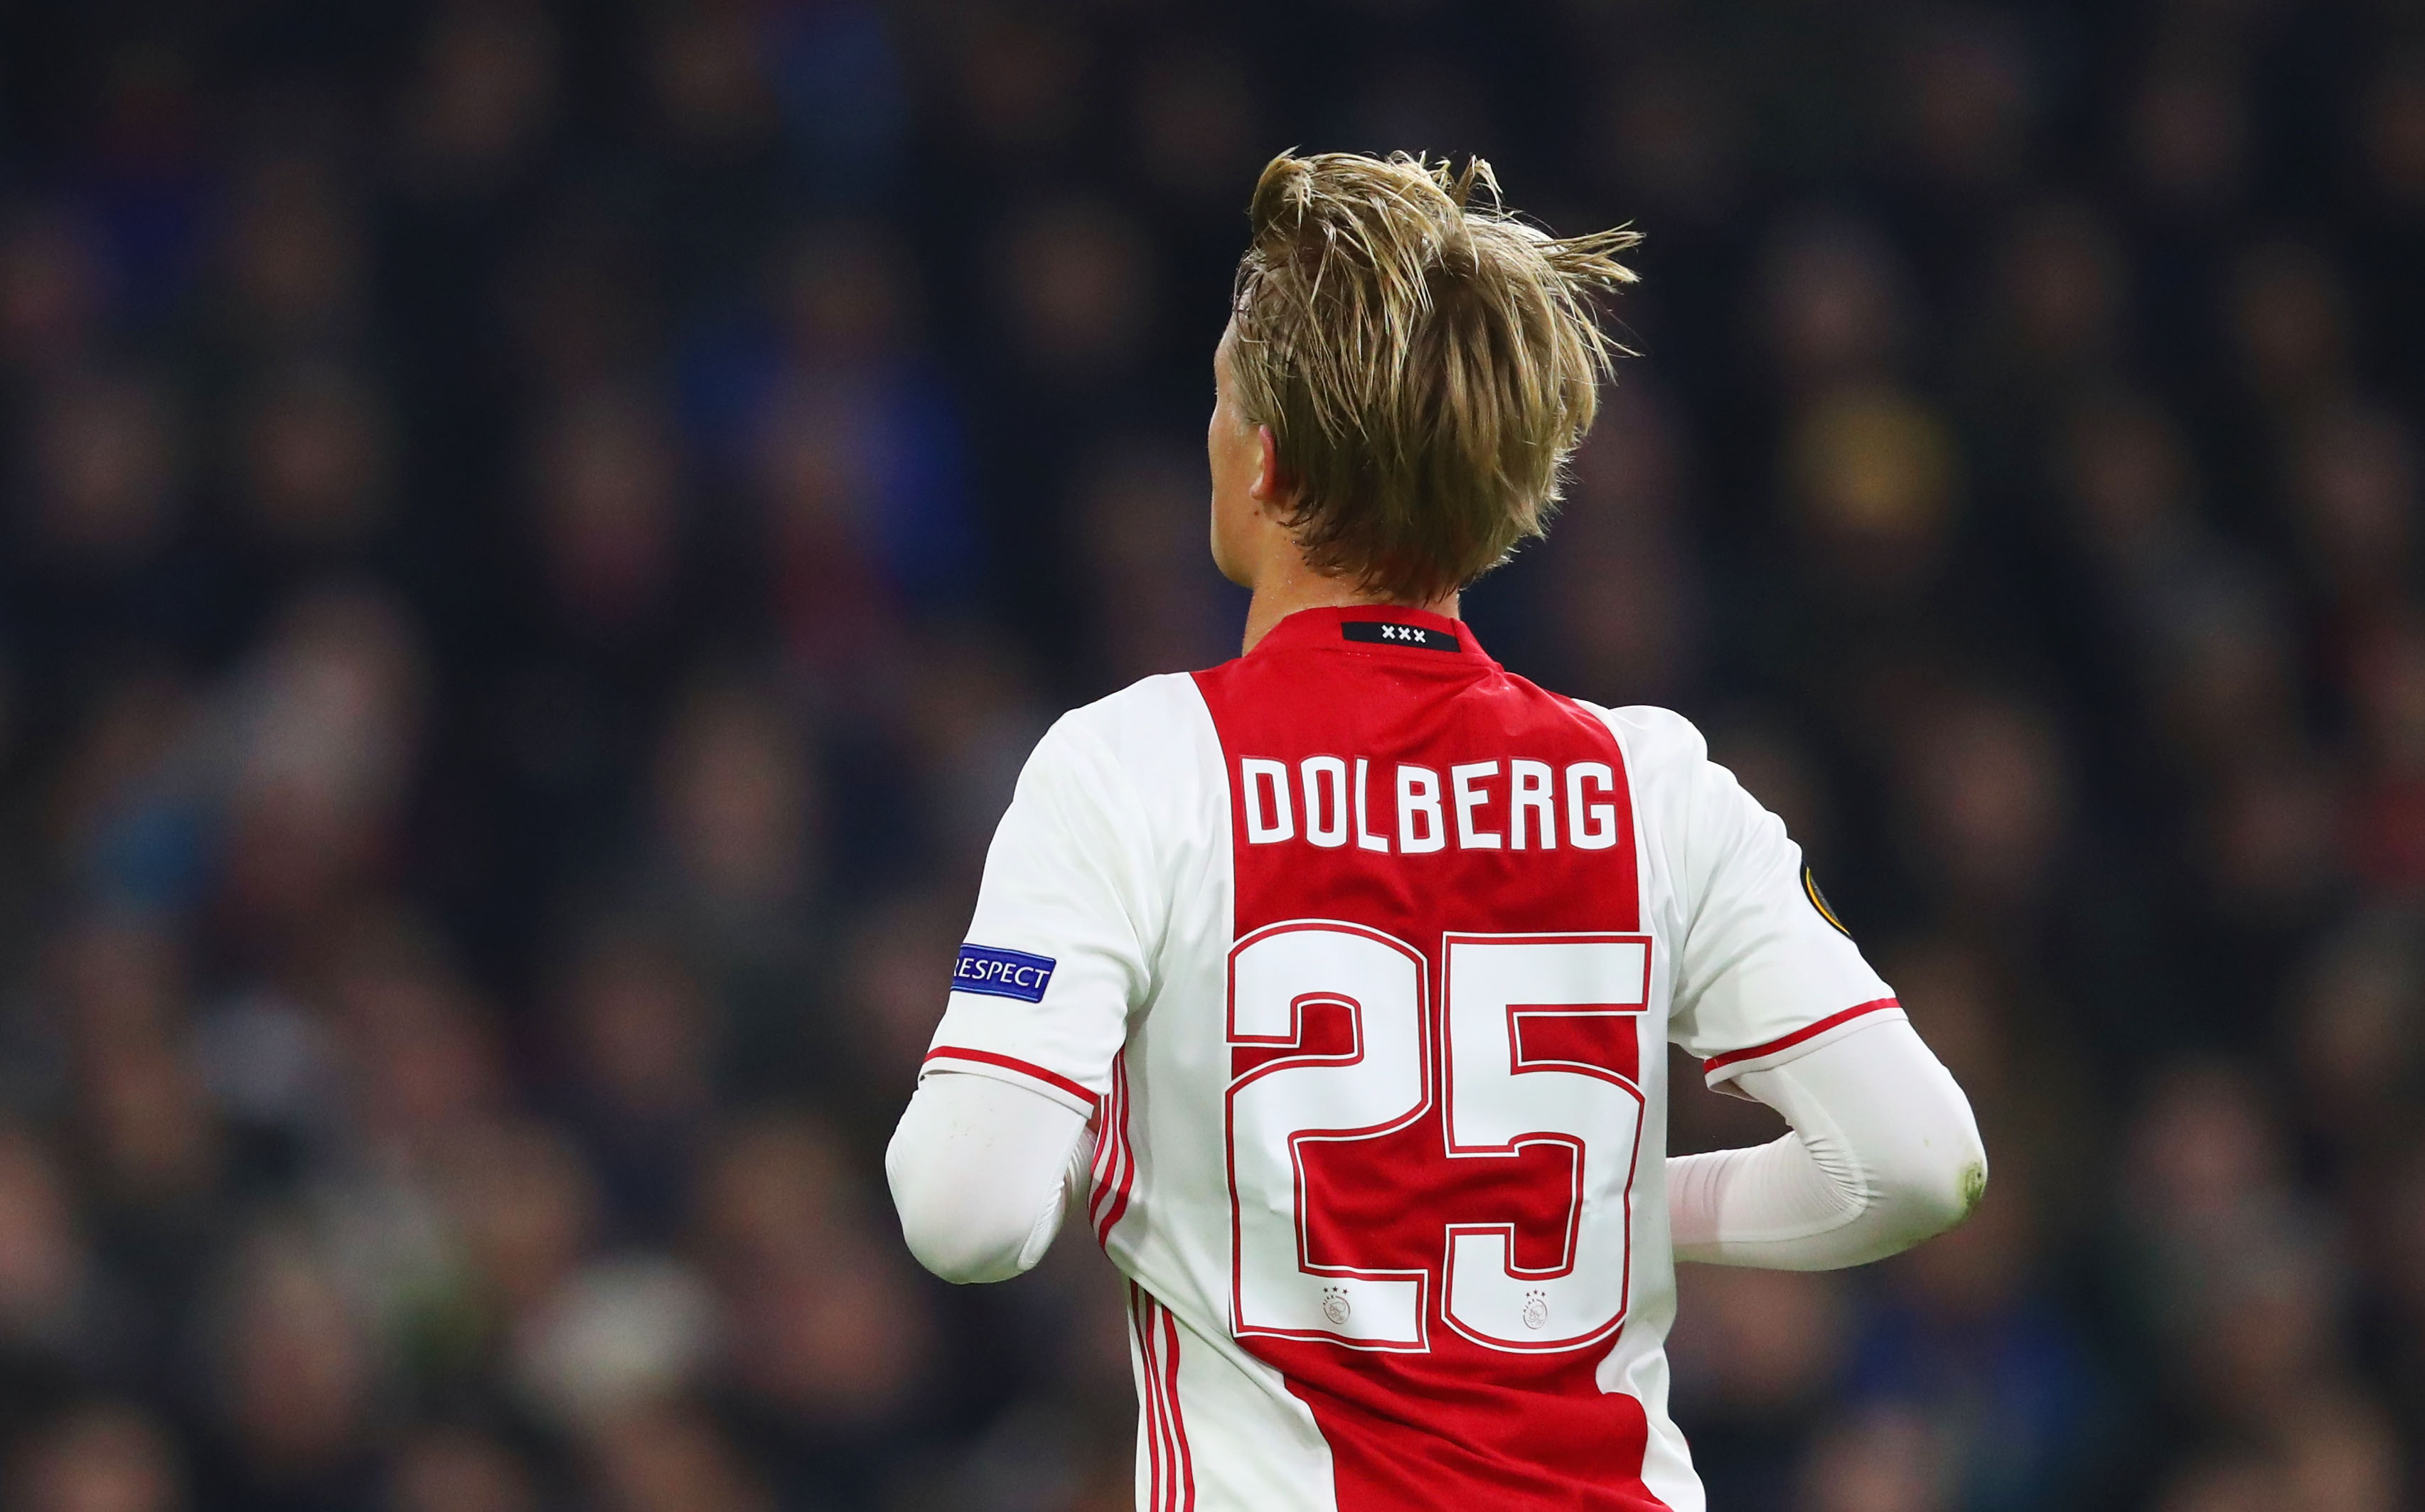 AMSTERDAM, NETHERLANDS - FEBRUARY 23:  Kasper Dolberg of Ajax in action during the UEFA Europa League Round of 32 second leg match between Ajax Amsterdam and Legia Warszawa at Amsterdam Arena on February 23, 2017 in Amsterdam, Netherlands.  (Photo by Dean Mouhtaropoulos/Getty Images)